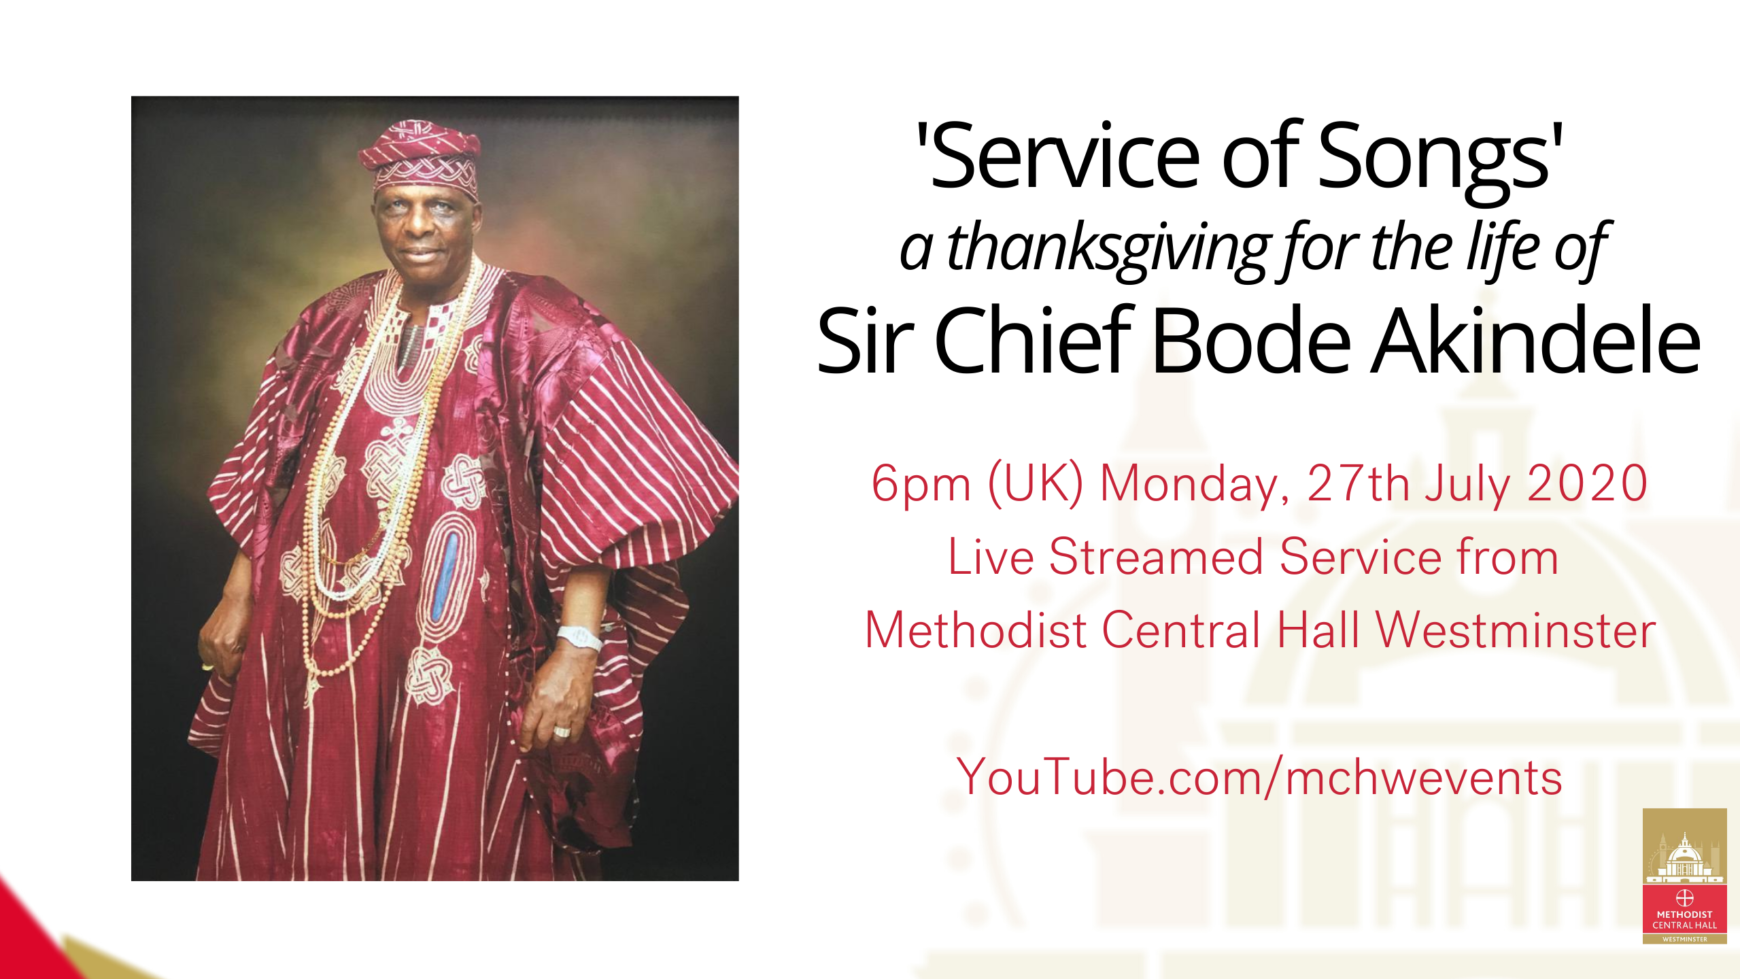 A Service of Thanksgiving for the life the life of Sir Chief Bode Akindele.